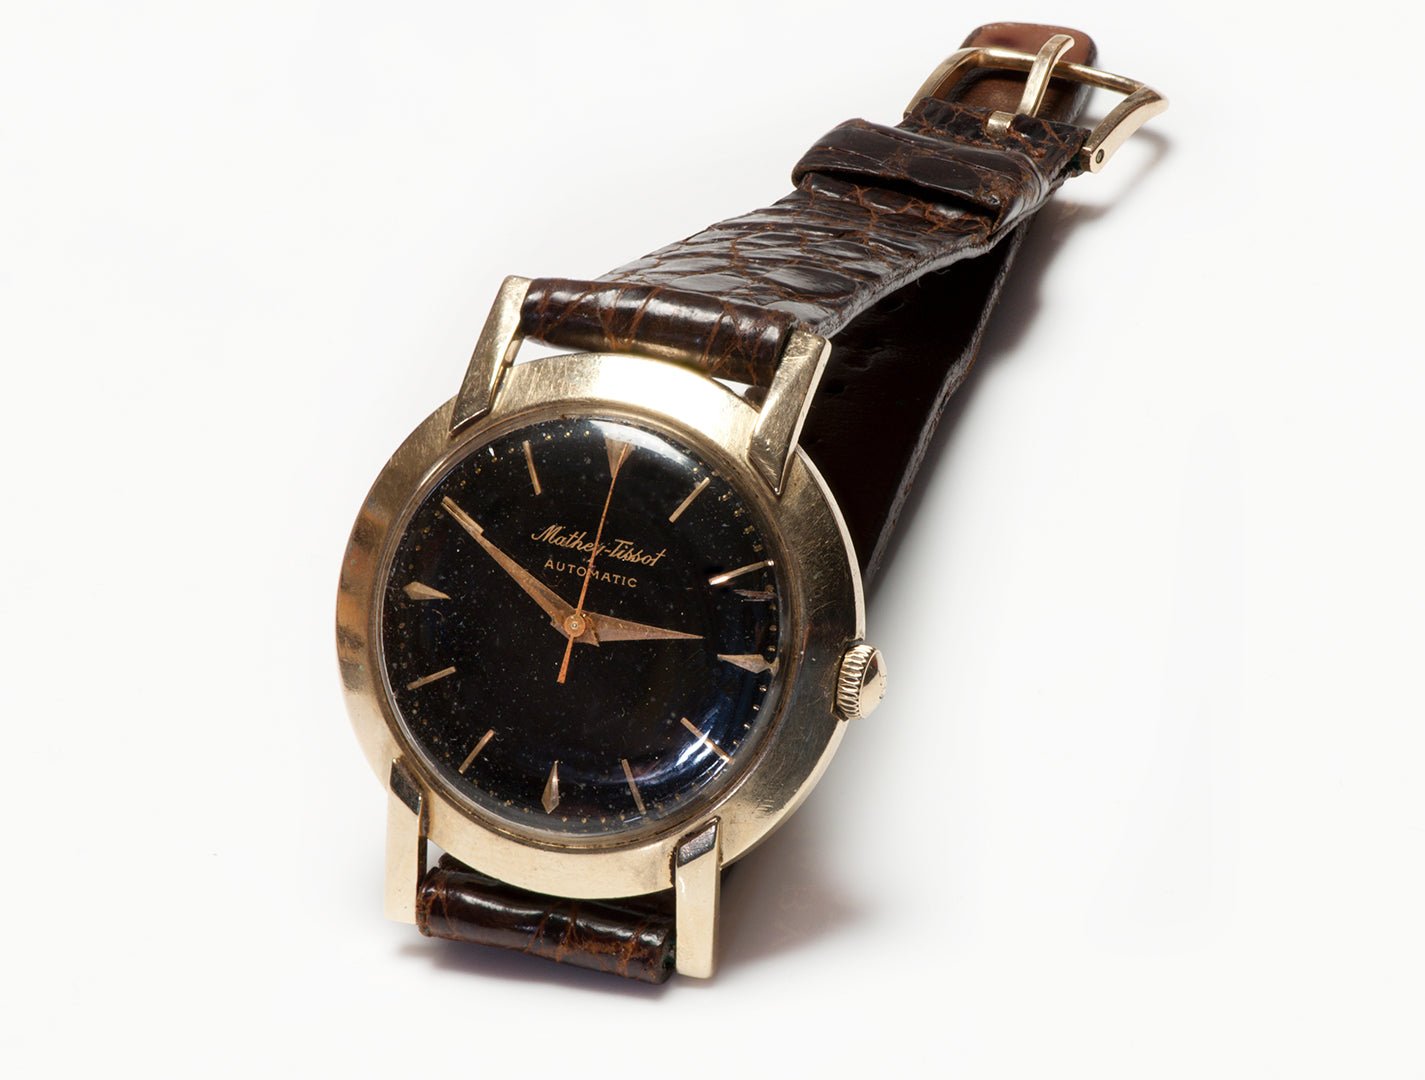 Vintage Tissot Watches - The Expression of Refinement And Quality - DSF Antique Jewelry